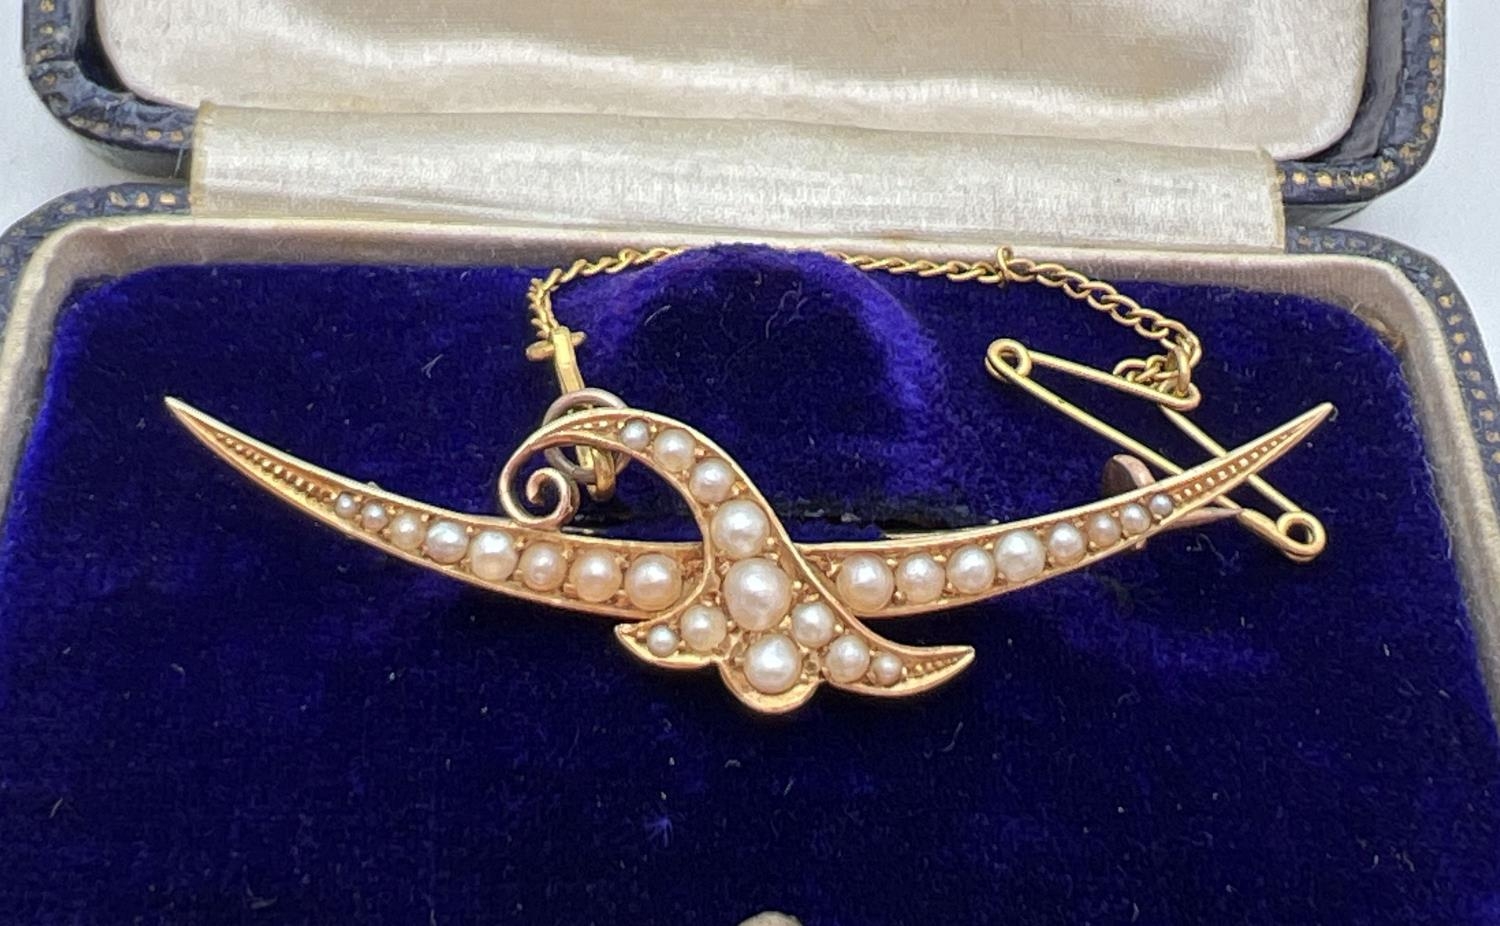 An Edwardian 15ct gold and seed pearl brooch in original box by Lloyd Payne & Amiel, Manchester. - Image 2 of 4